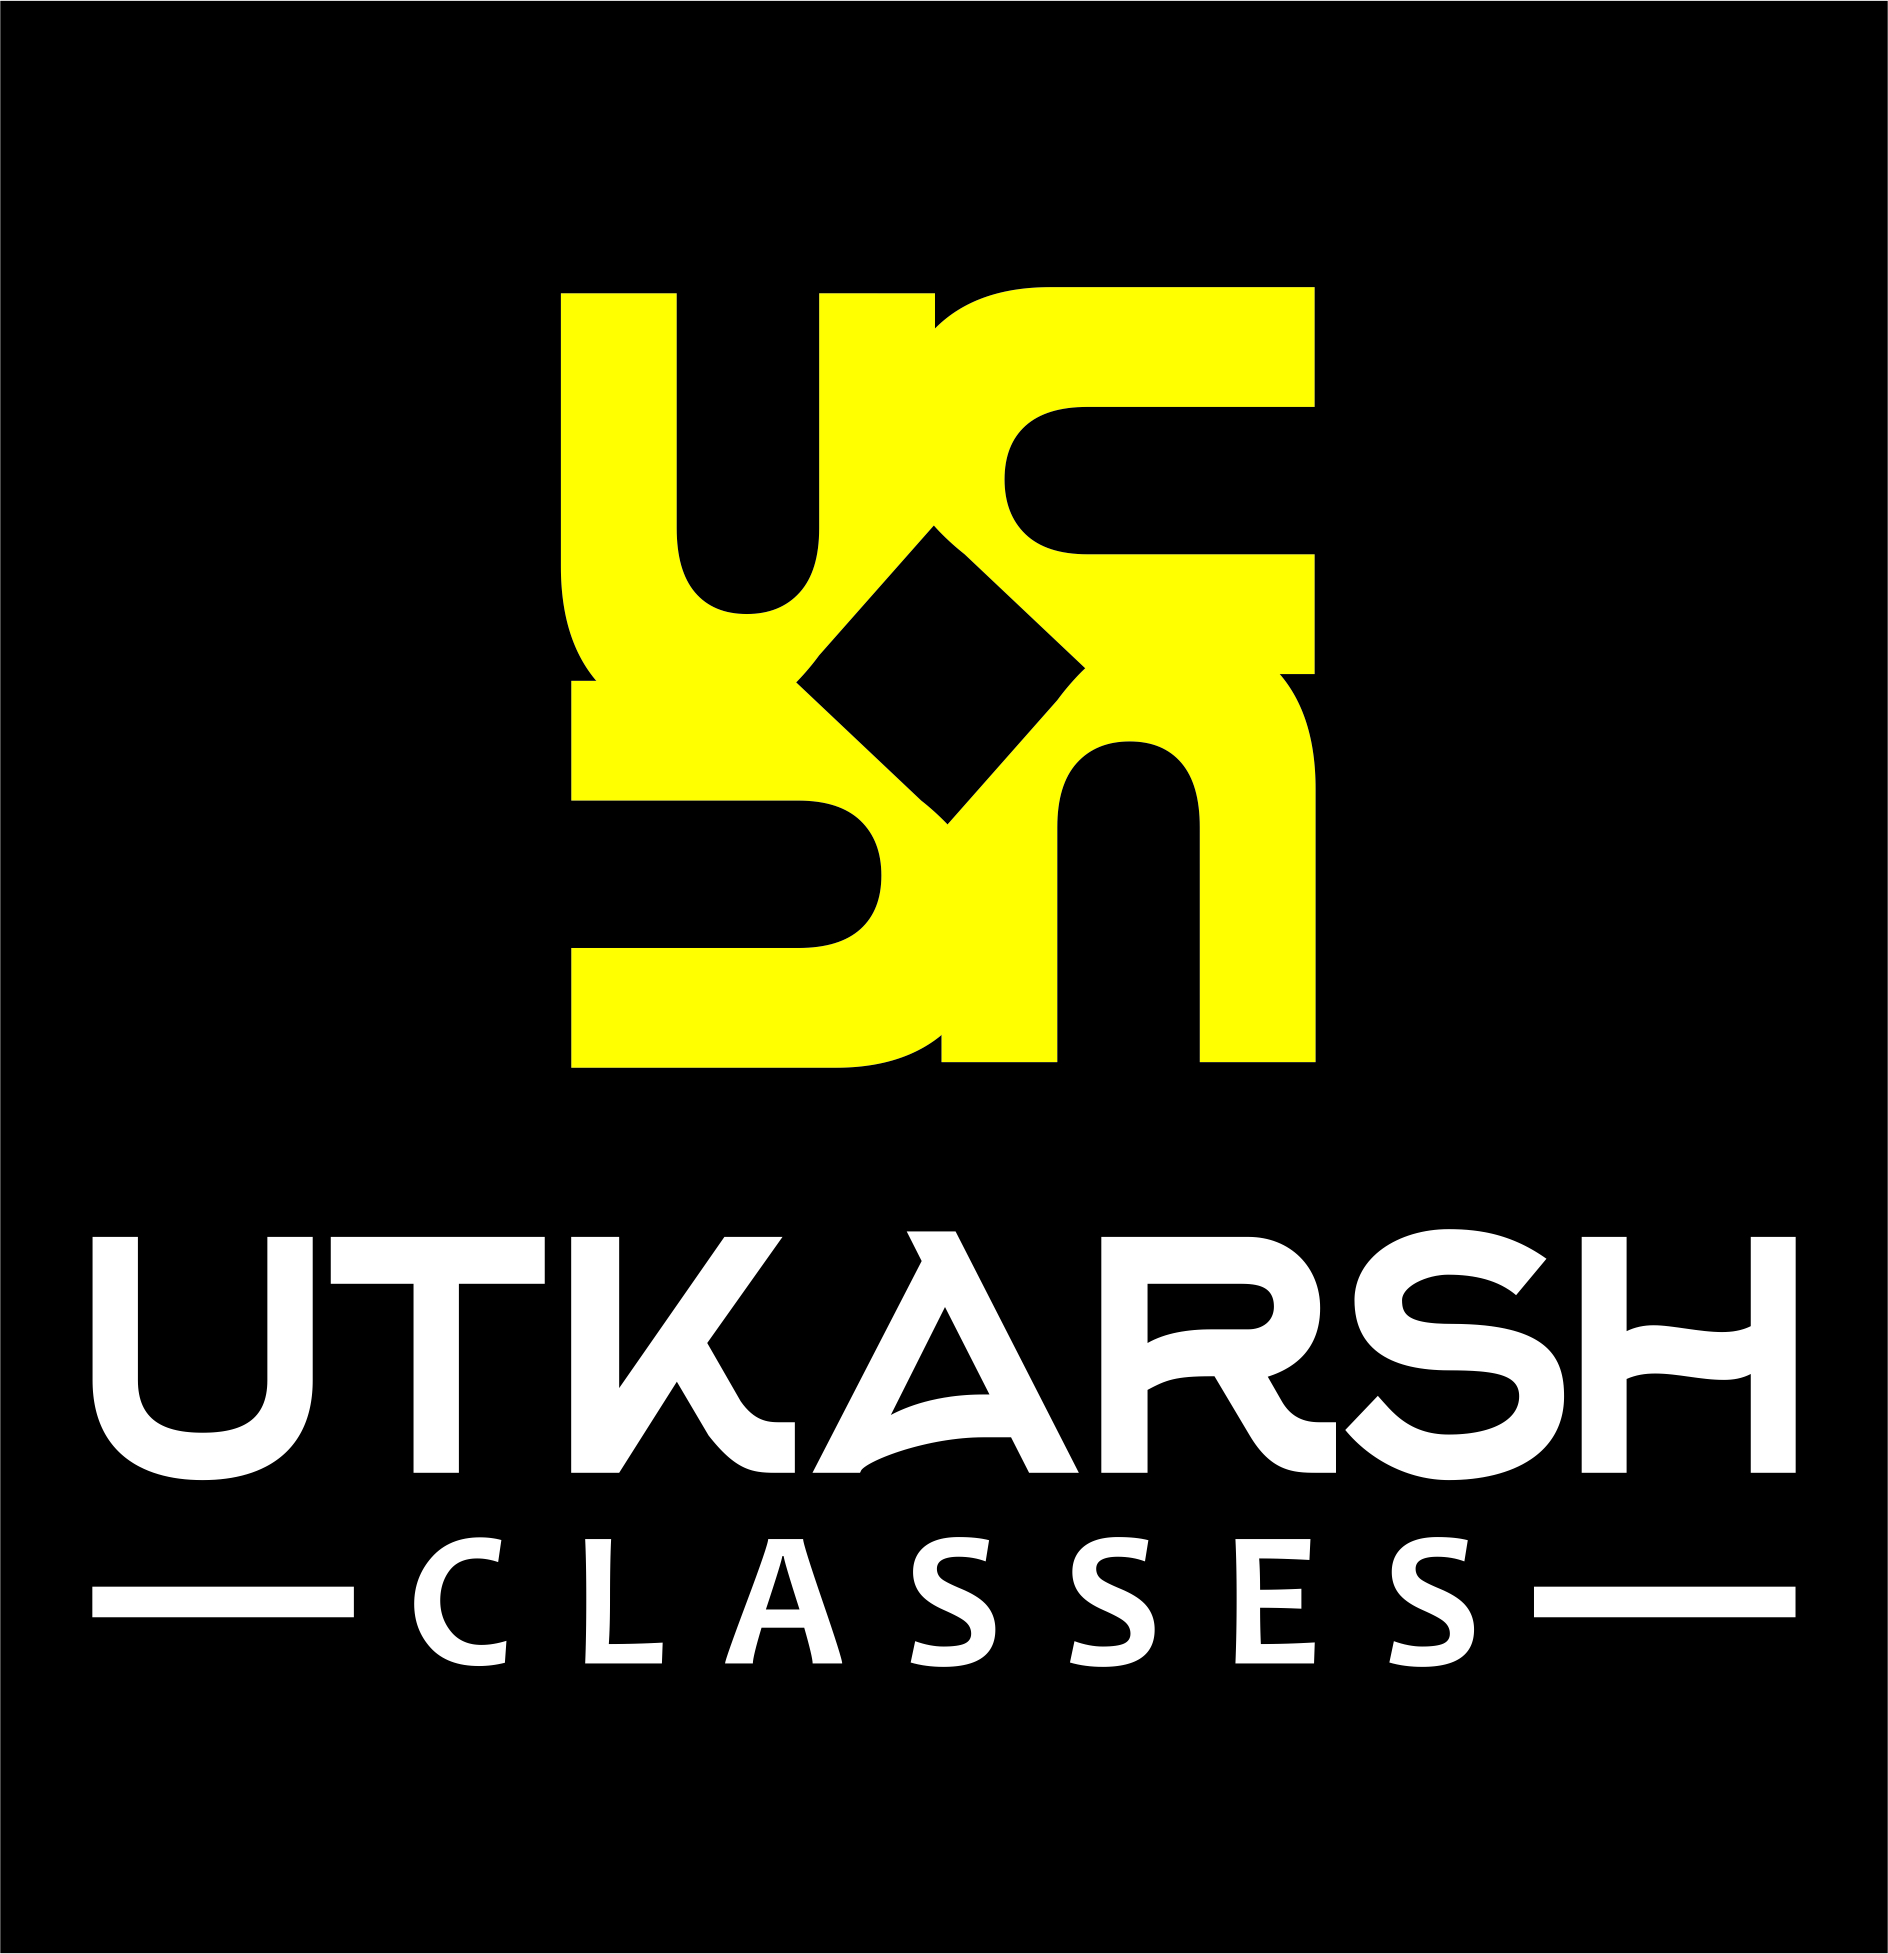 Utkarsh Classes has surpassed 10 million subscribers on YouTube and app downloads decoding=